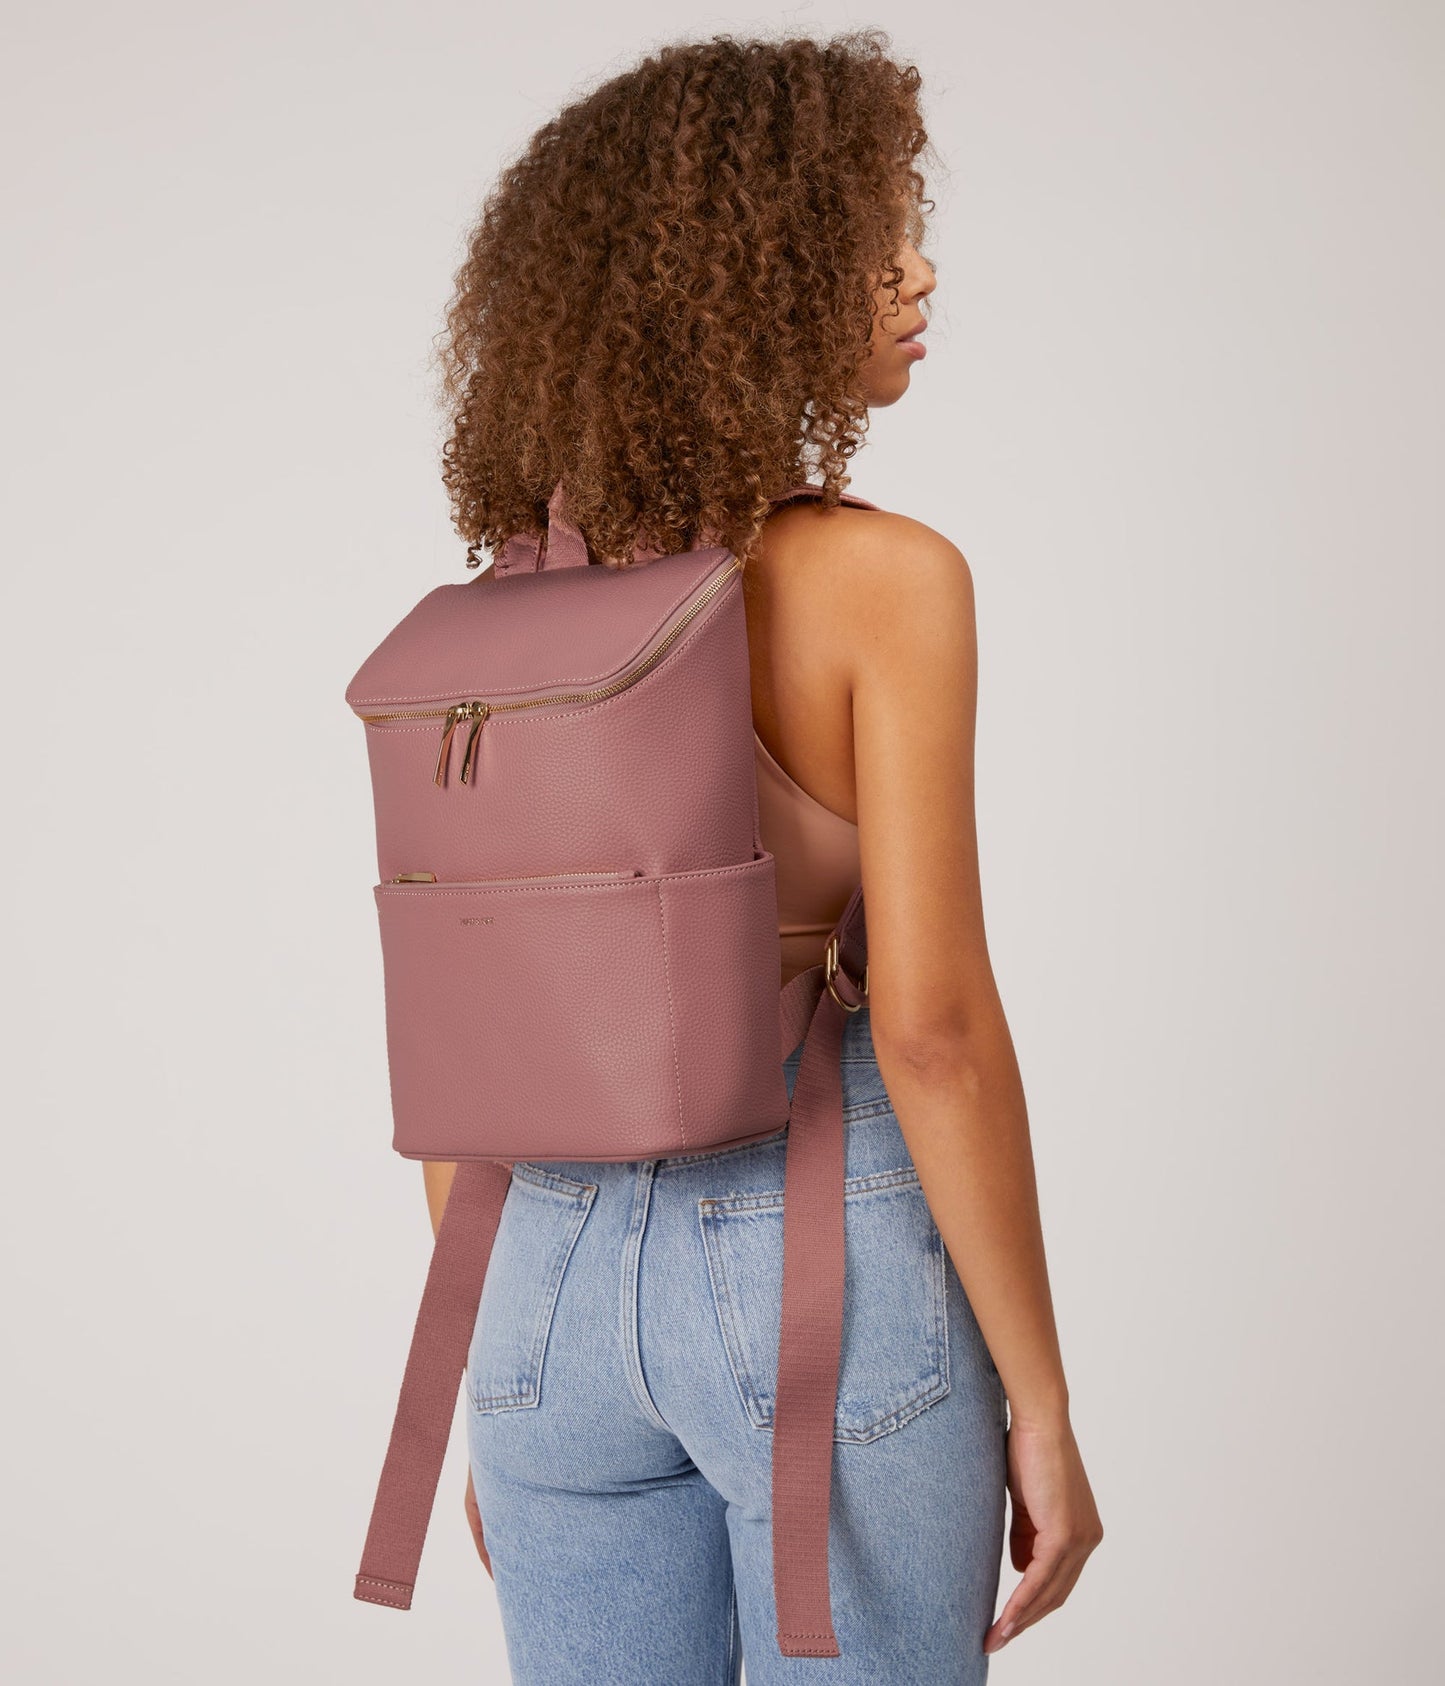 BRAVE PURITY BACKPACK / ROSE